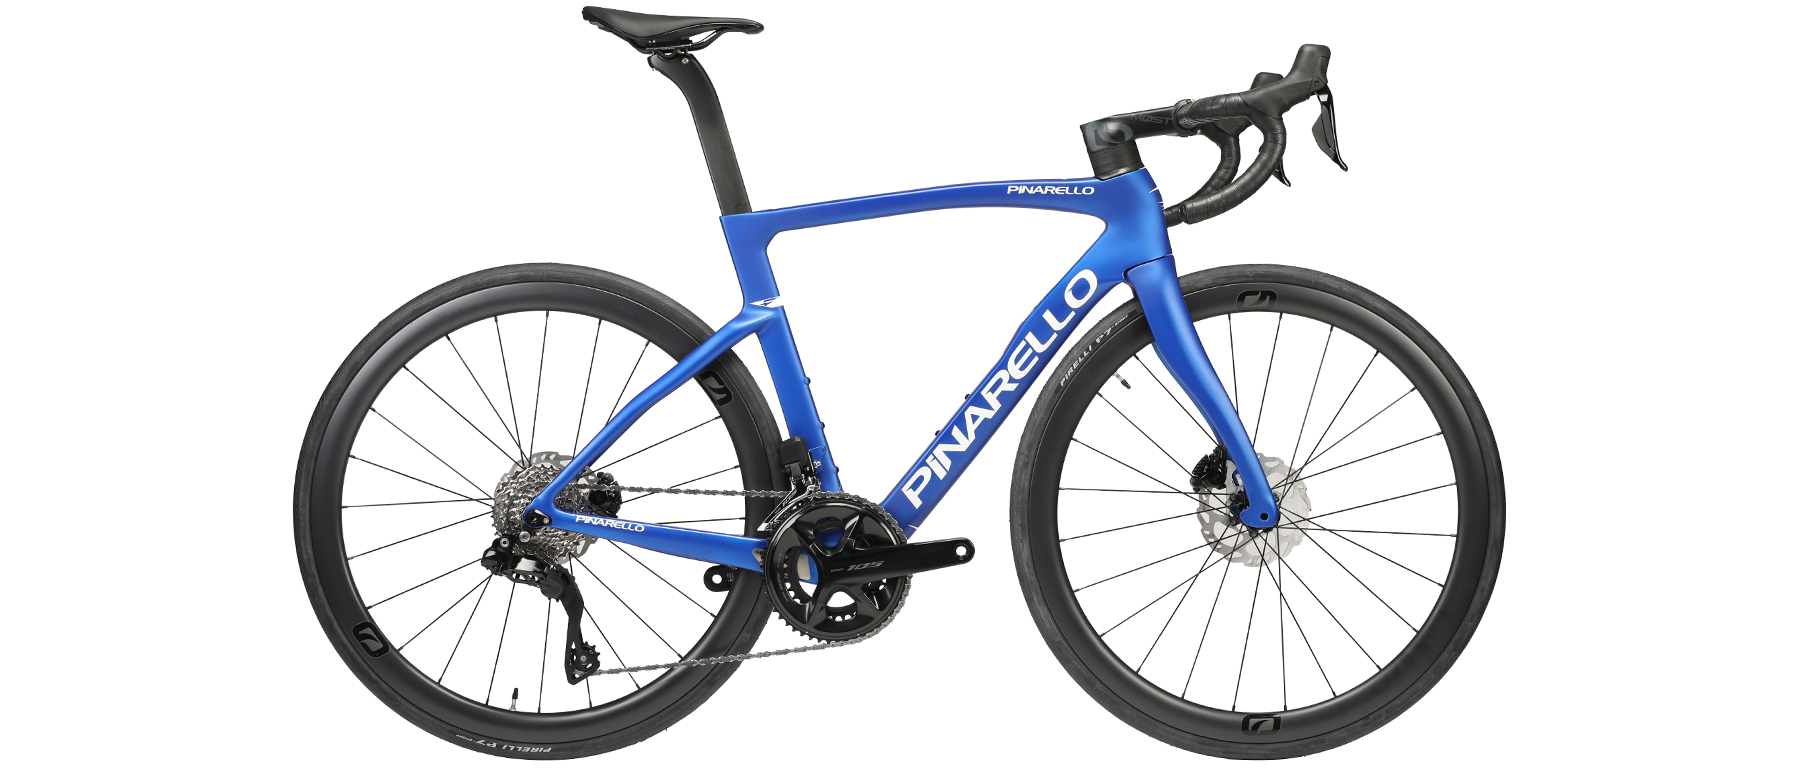 Pinarello F5 105 Di2 R7170 Bicycle (with Carbon Wheelset)